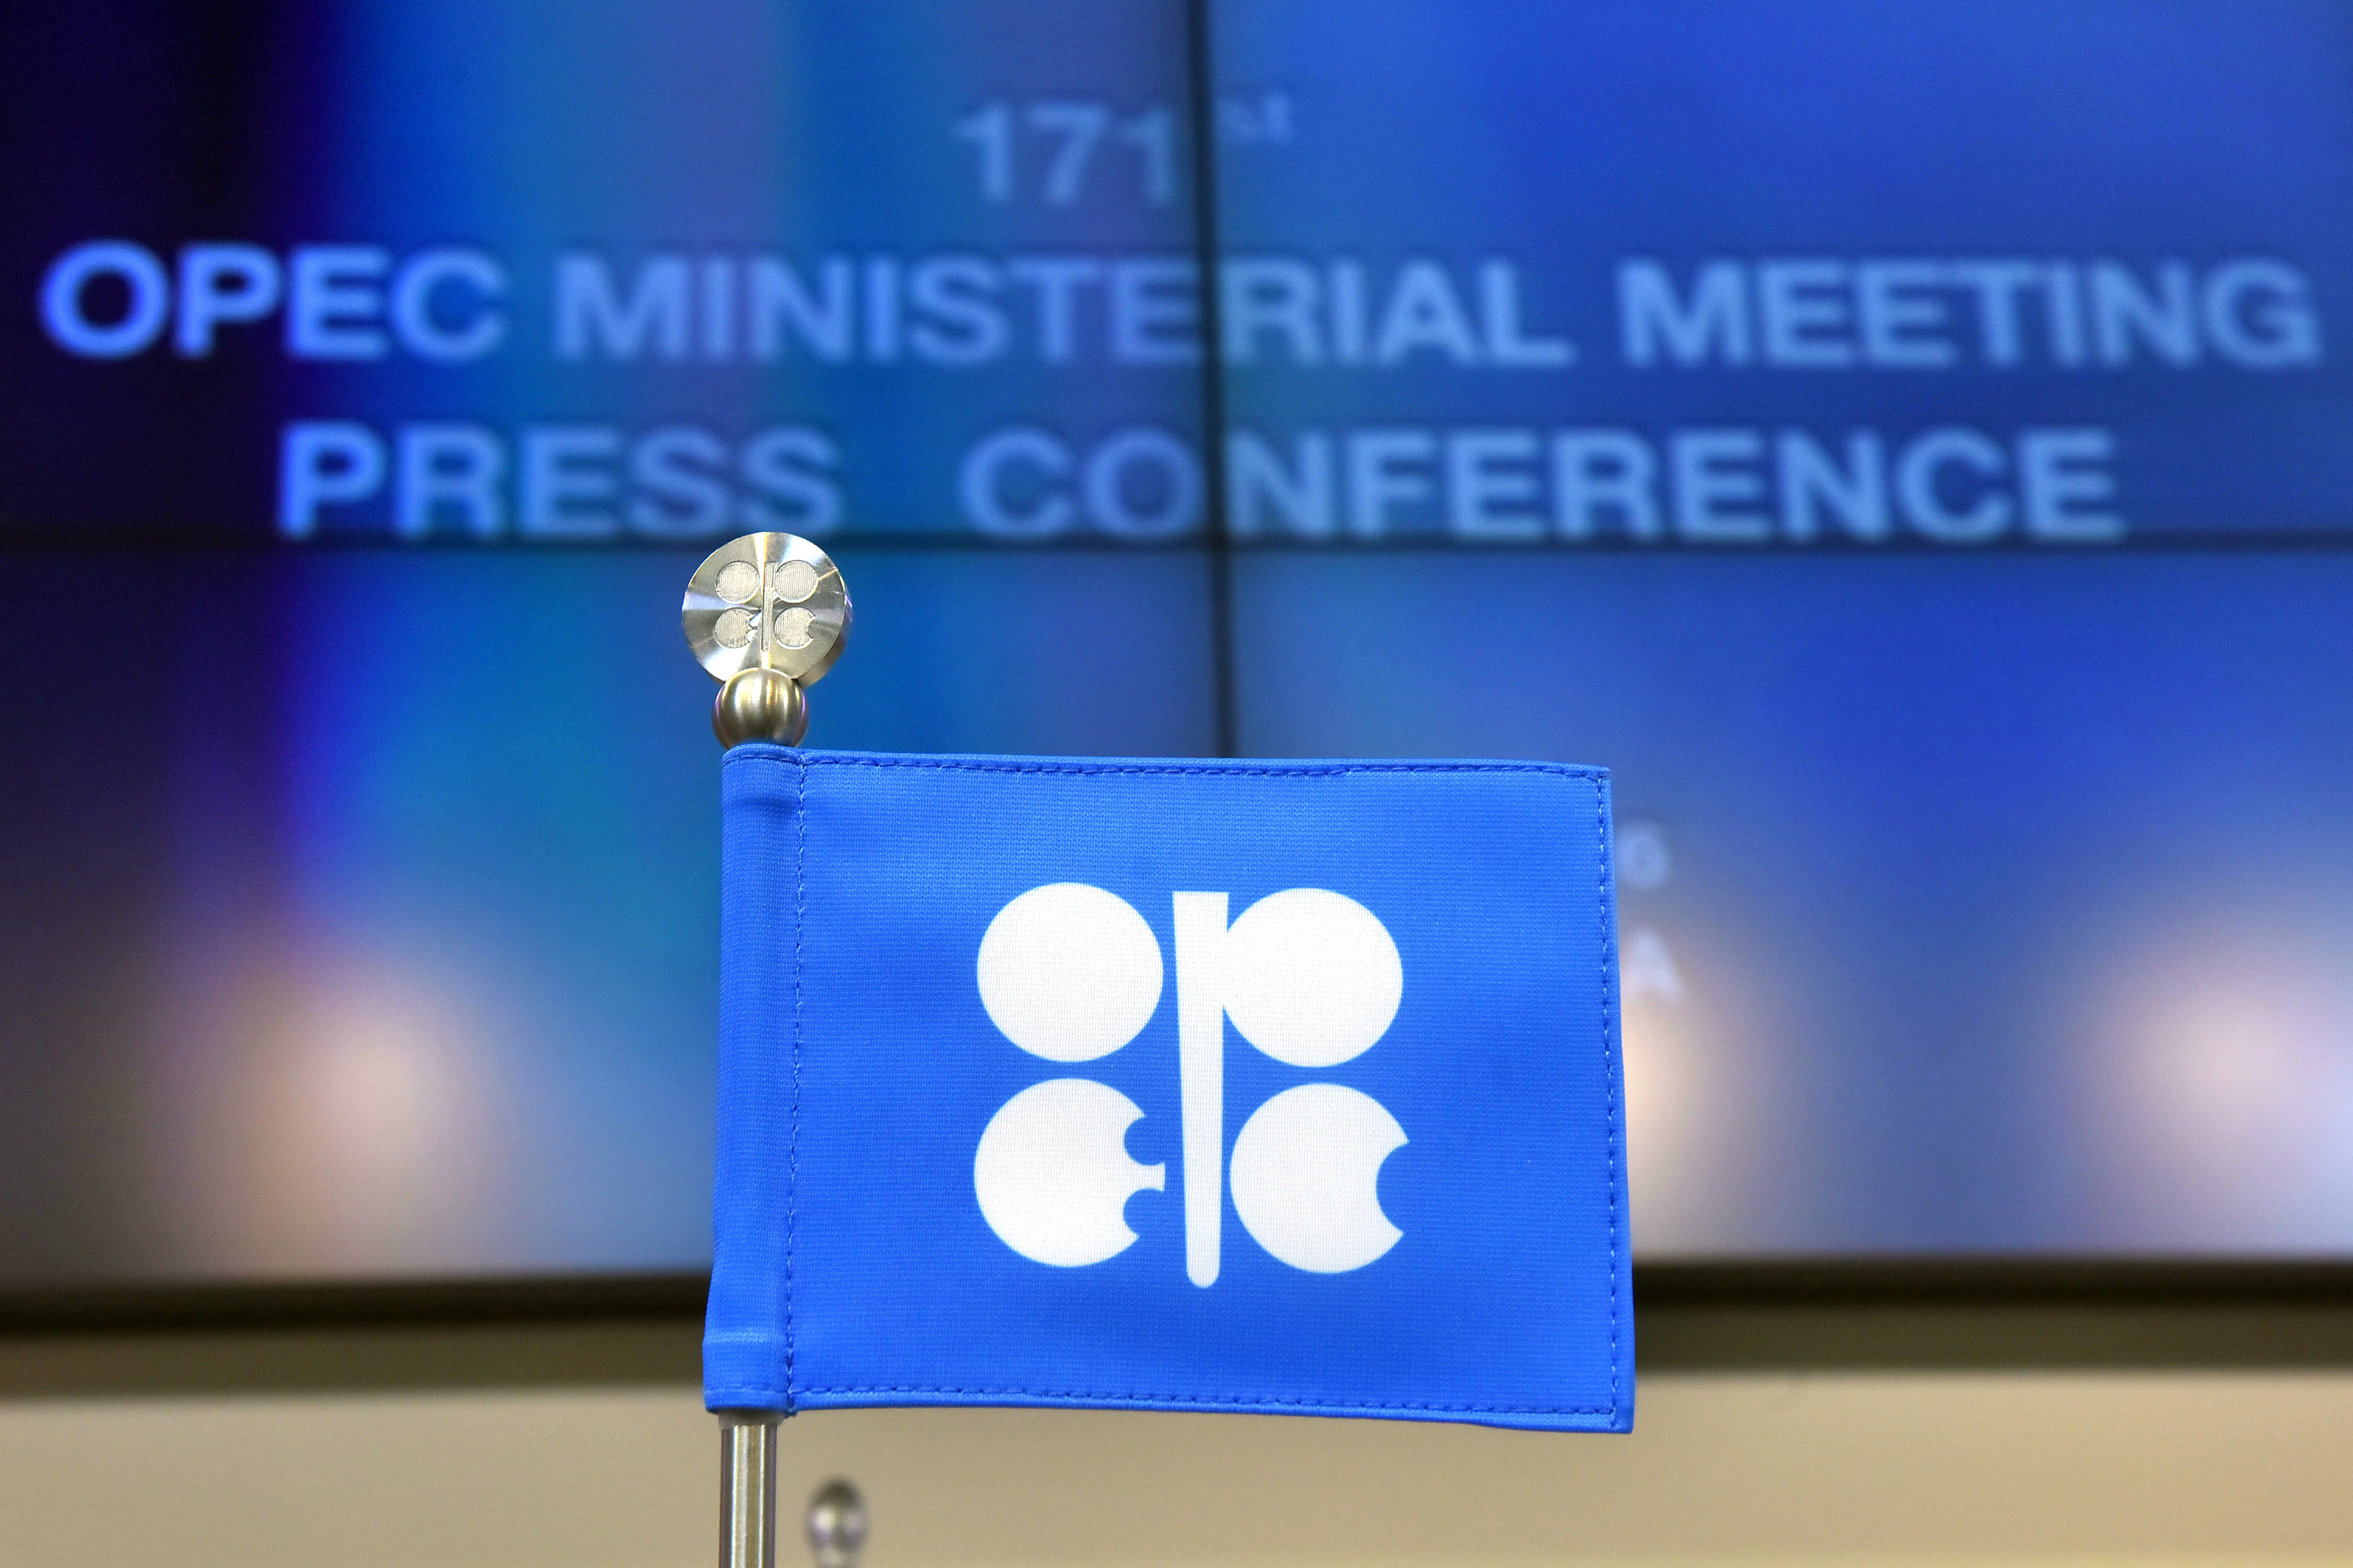 The 171st Organization Of Petroleum Exporting Countries (OPEC) Conference